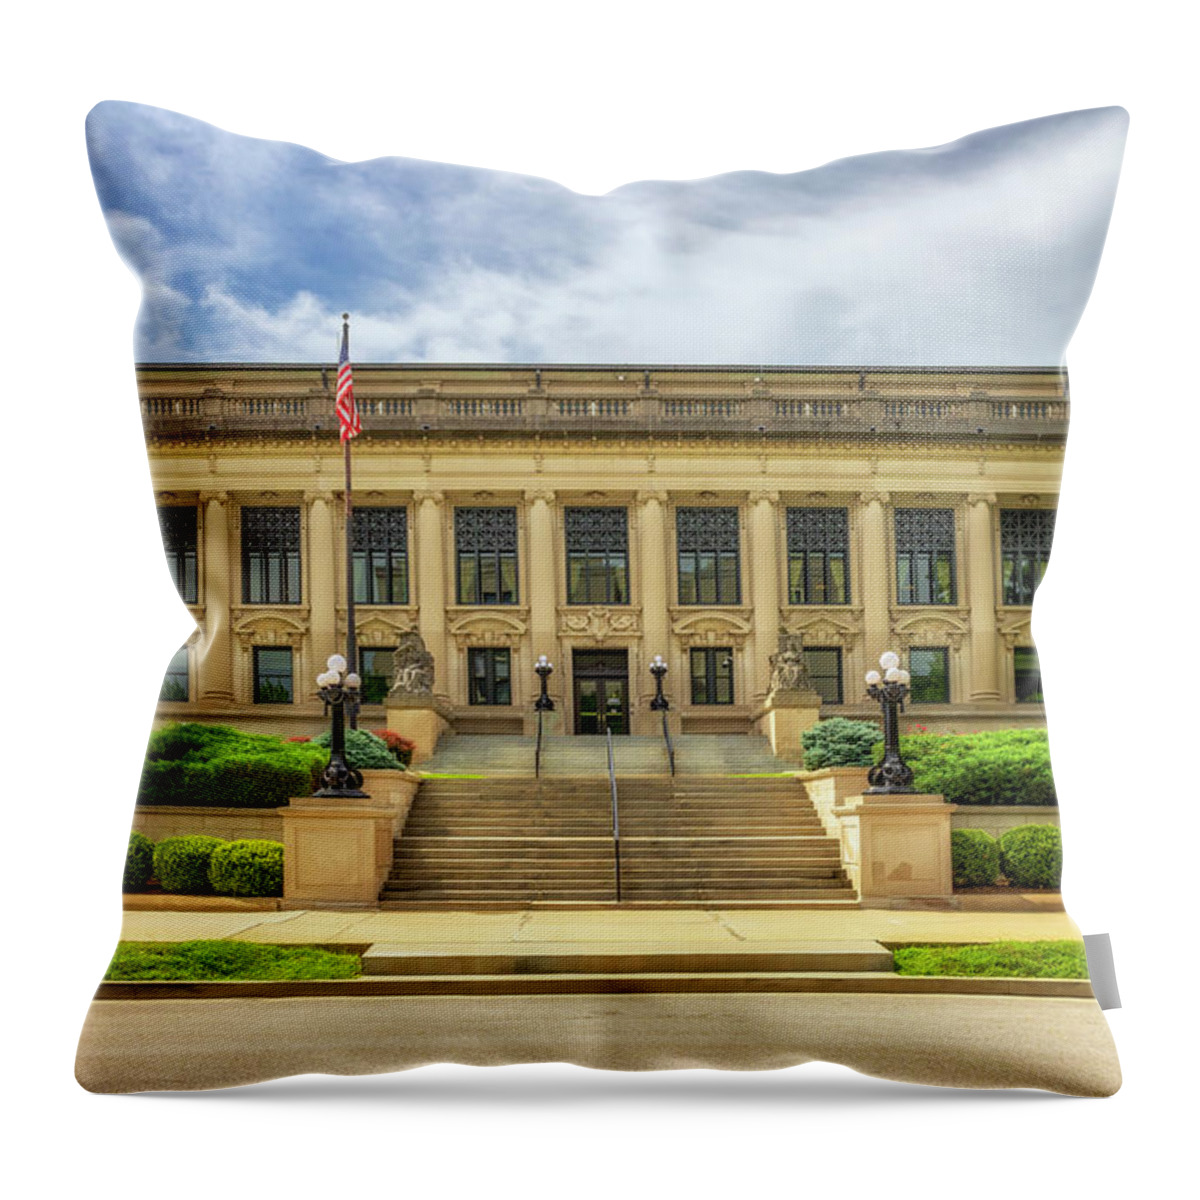 Illinois Supreme Court Throw Pillow featuring the photograph Illinois Supreme Court - Springfield, Illinois by Susan Rissi Tregoning